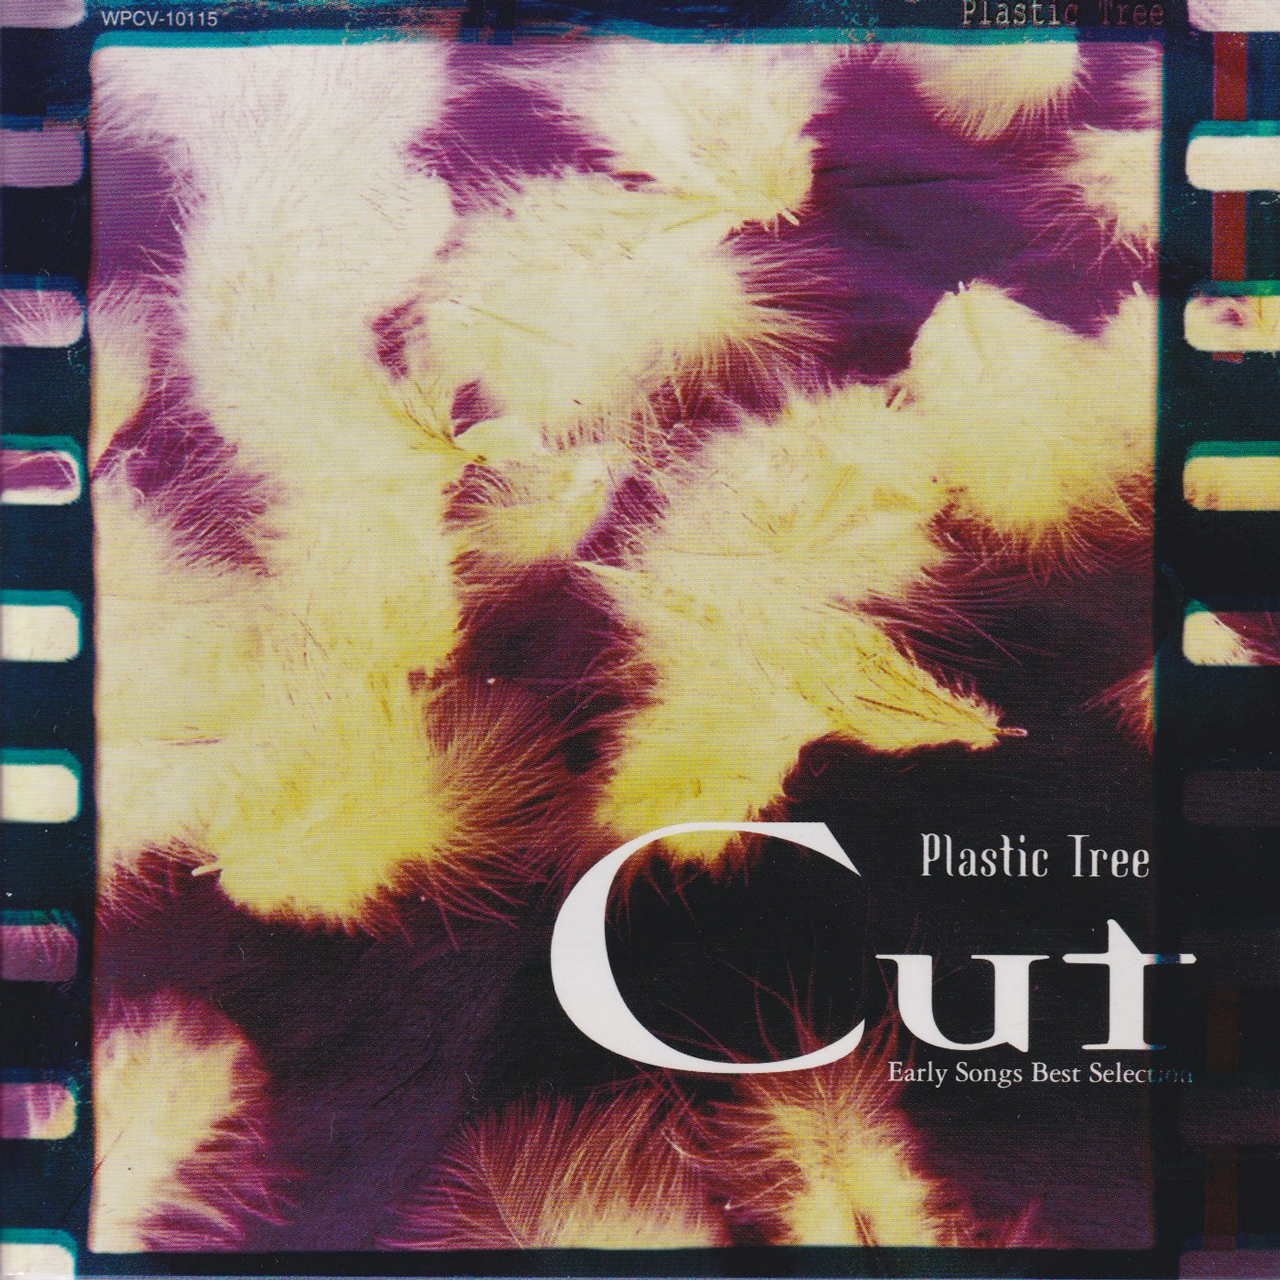 Cut 〜Early Songs Best Selection〜 / Plastic Tree